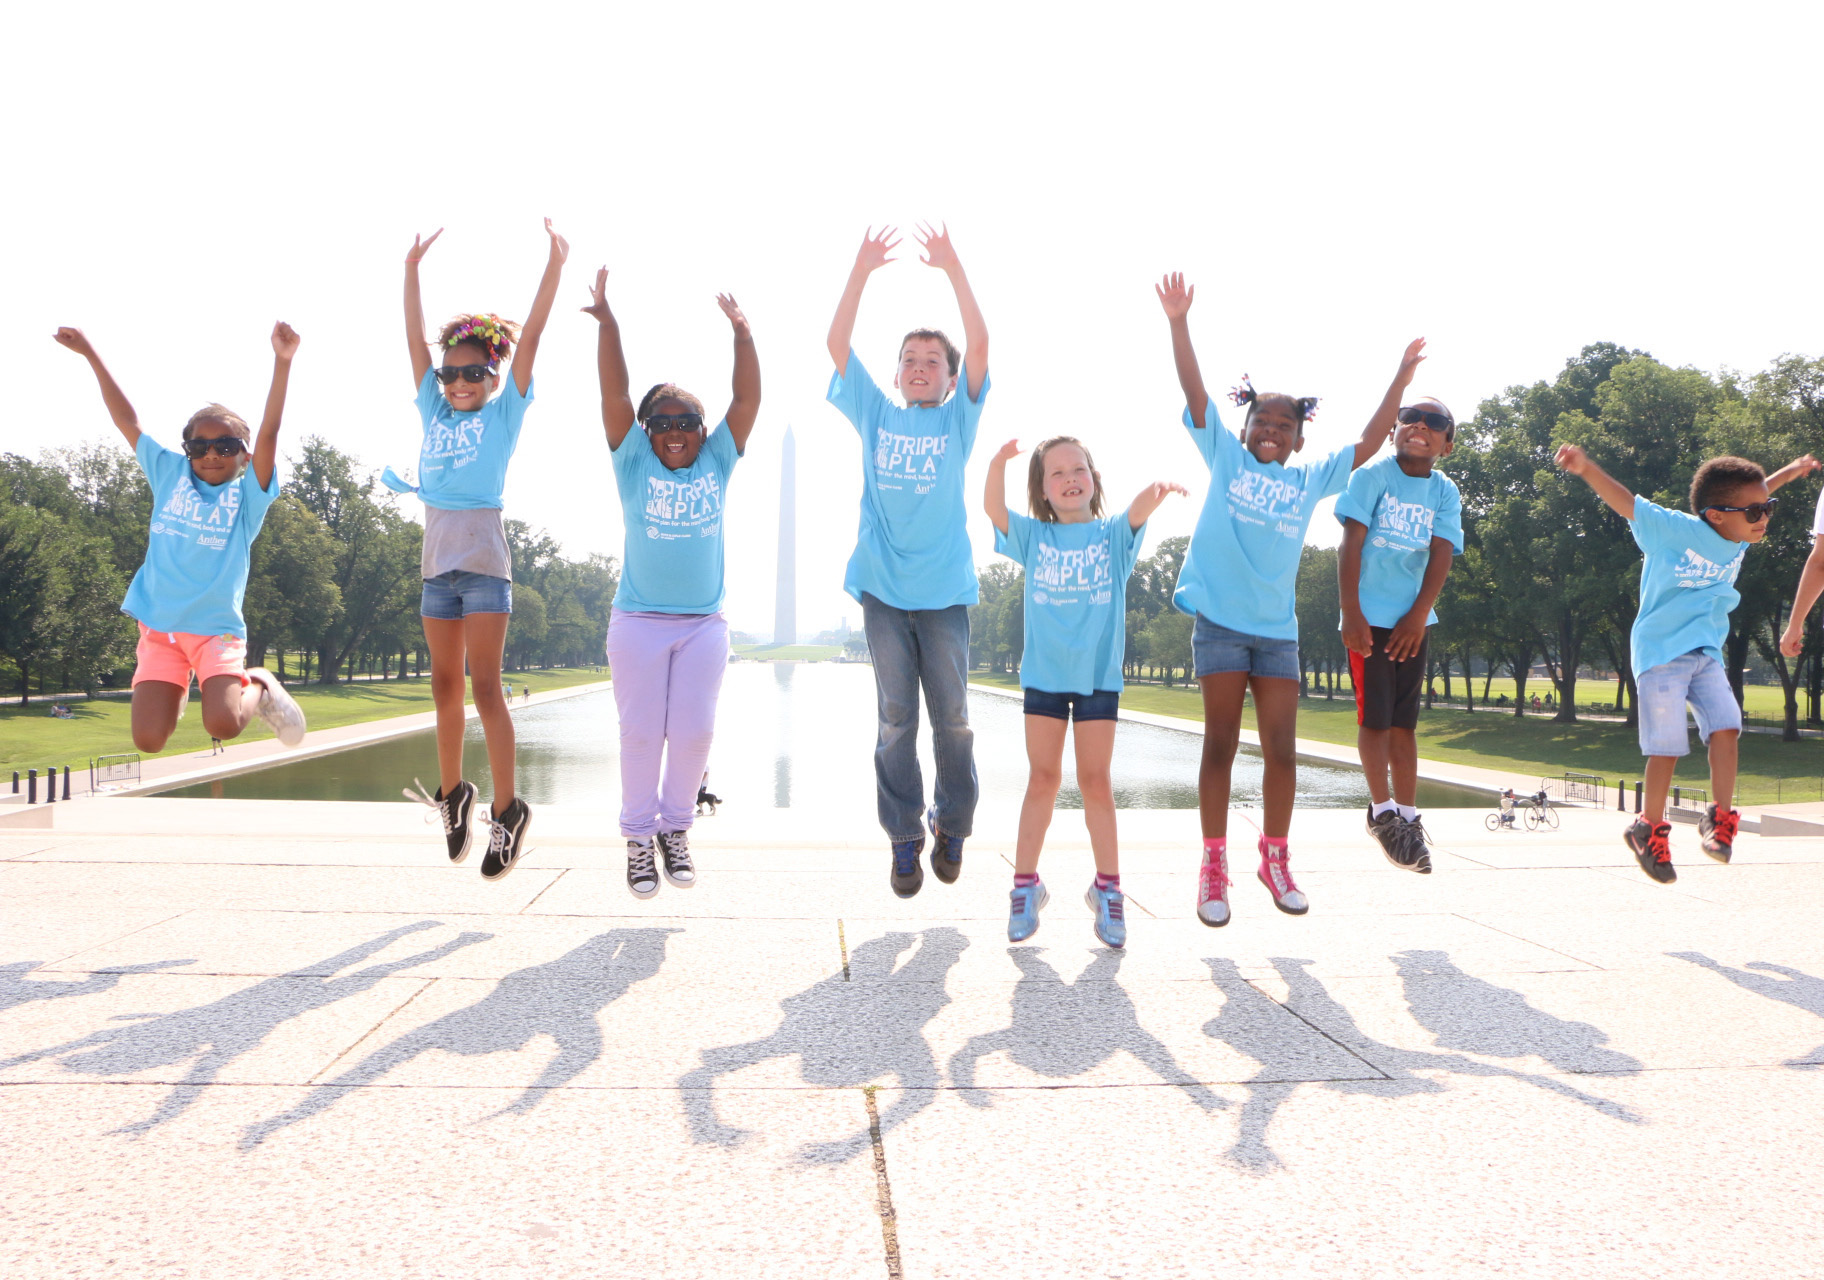 Boys & Girls Clubs of America Educate Youth on Healthy Habits and More Than 500 Clubs Nationwide Achieve Goal of 5 Million Minutes of Activity on Triple Play Day with Partners The Coca-Cola Company and the Anthem Foundation